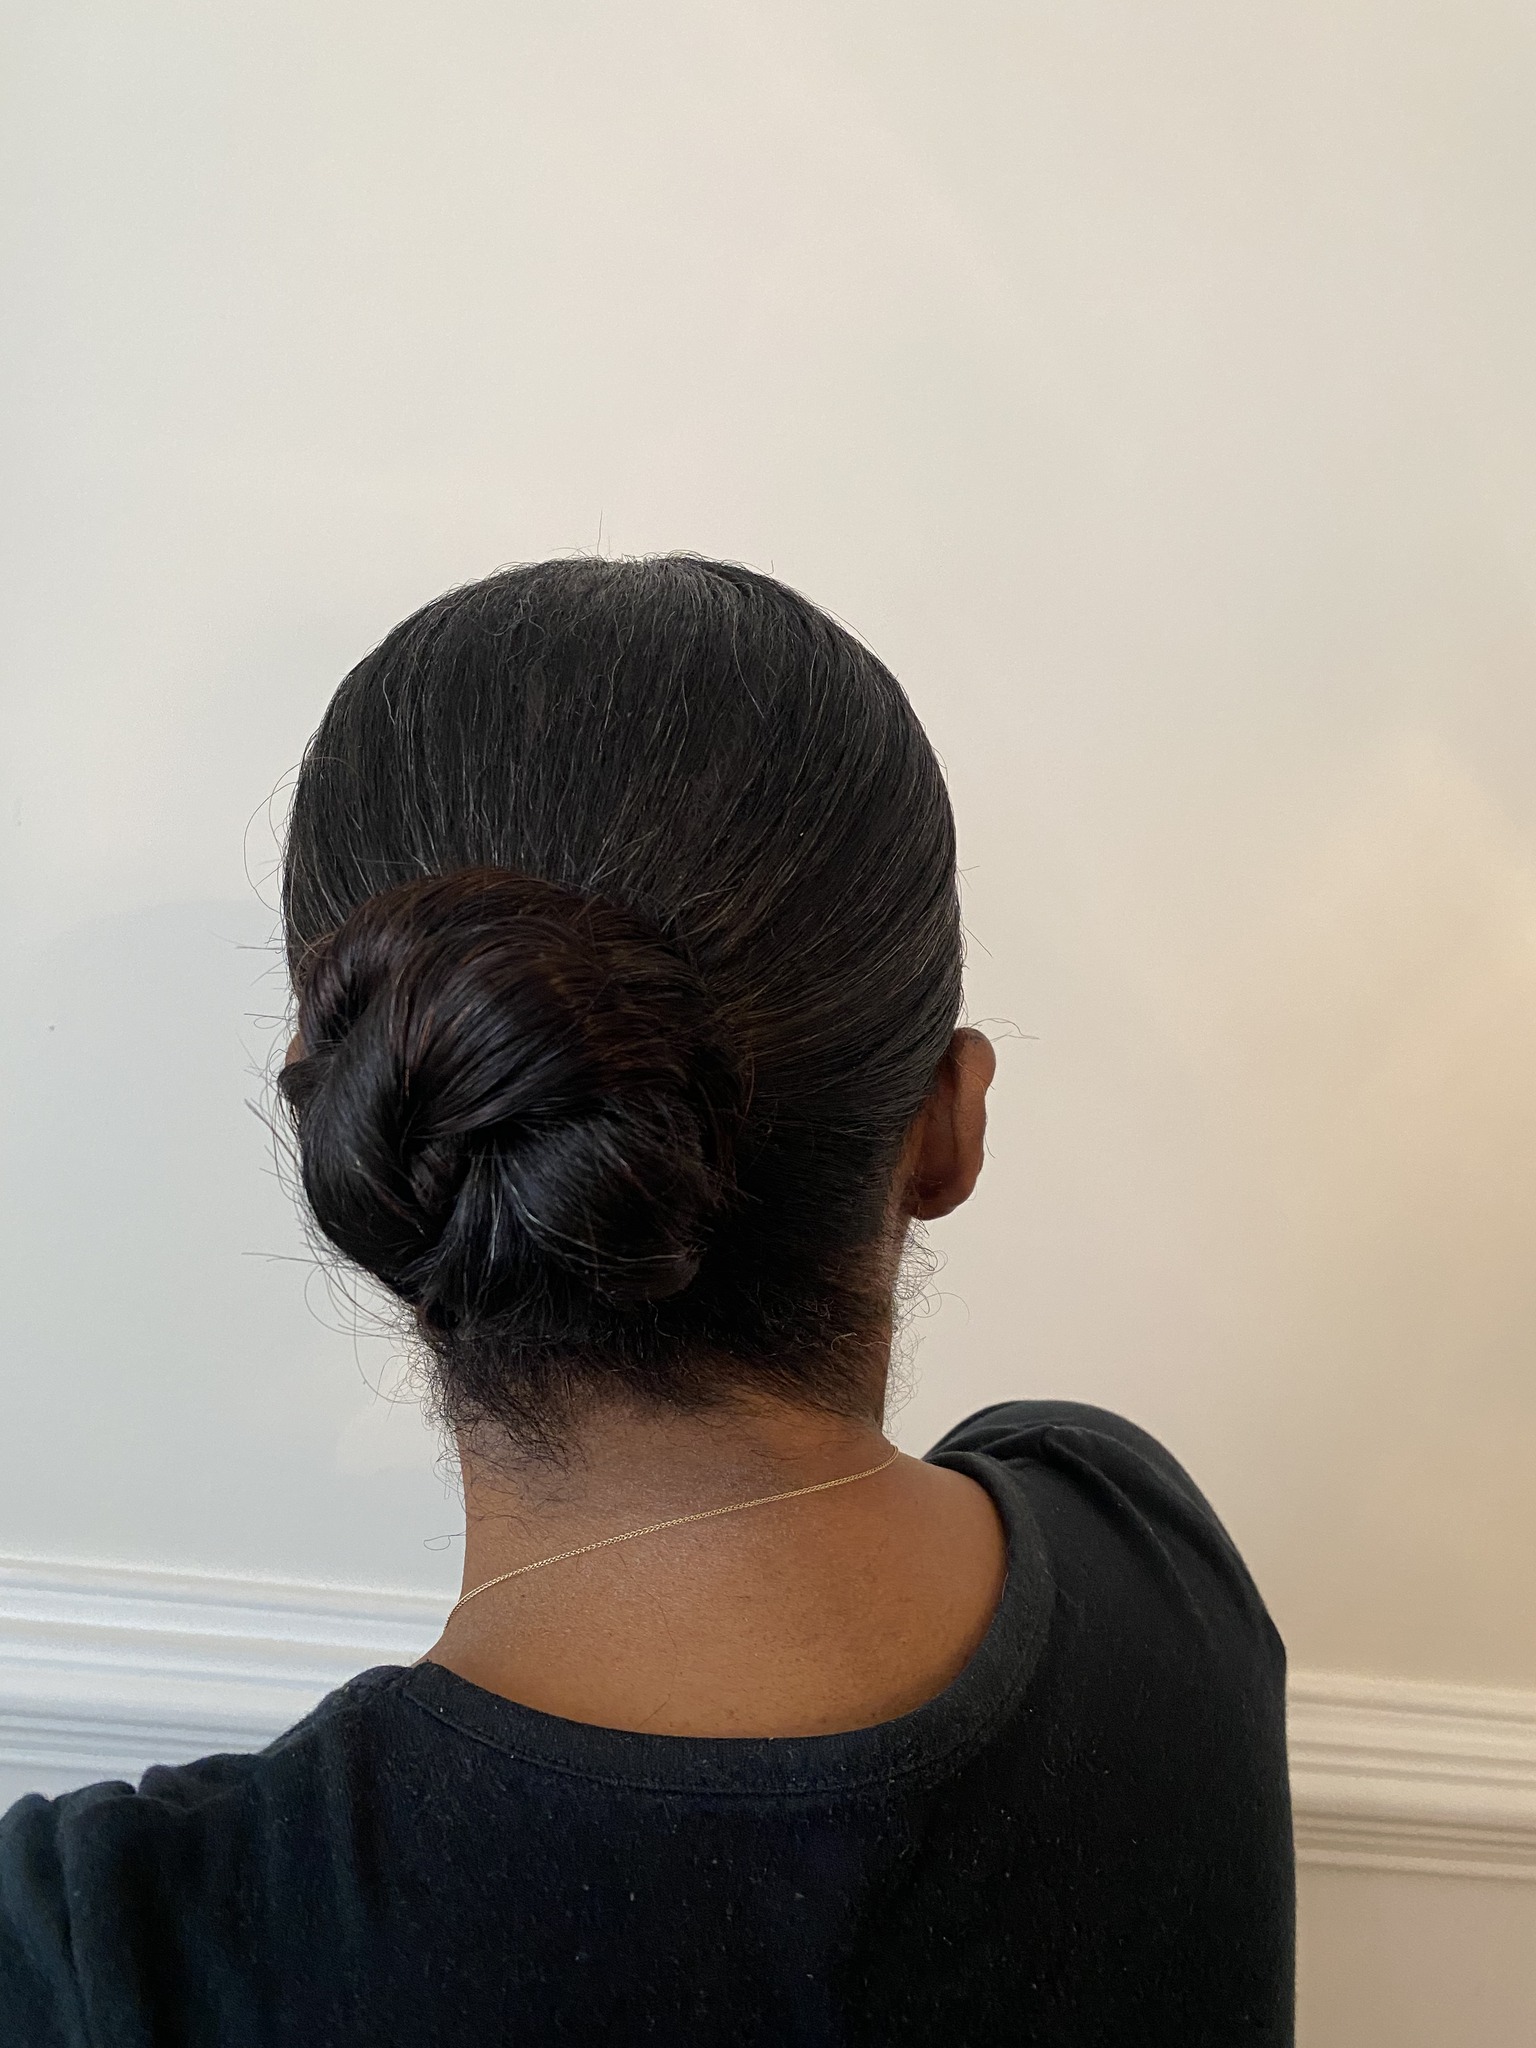 Get The Look: Quick, Simple And Chic Bun